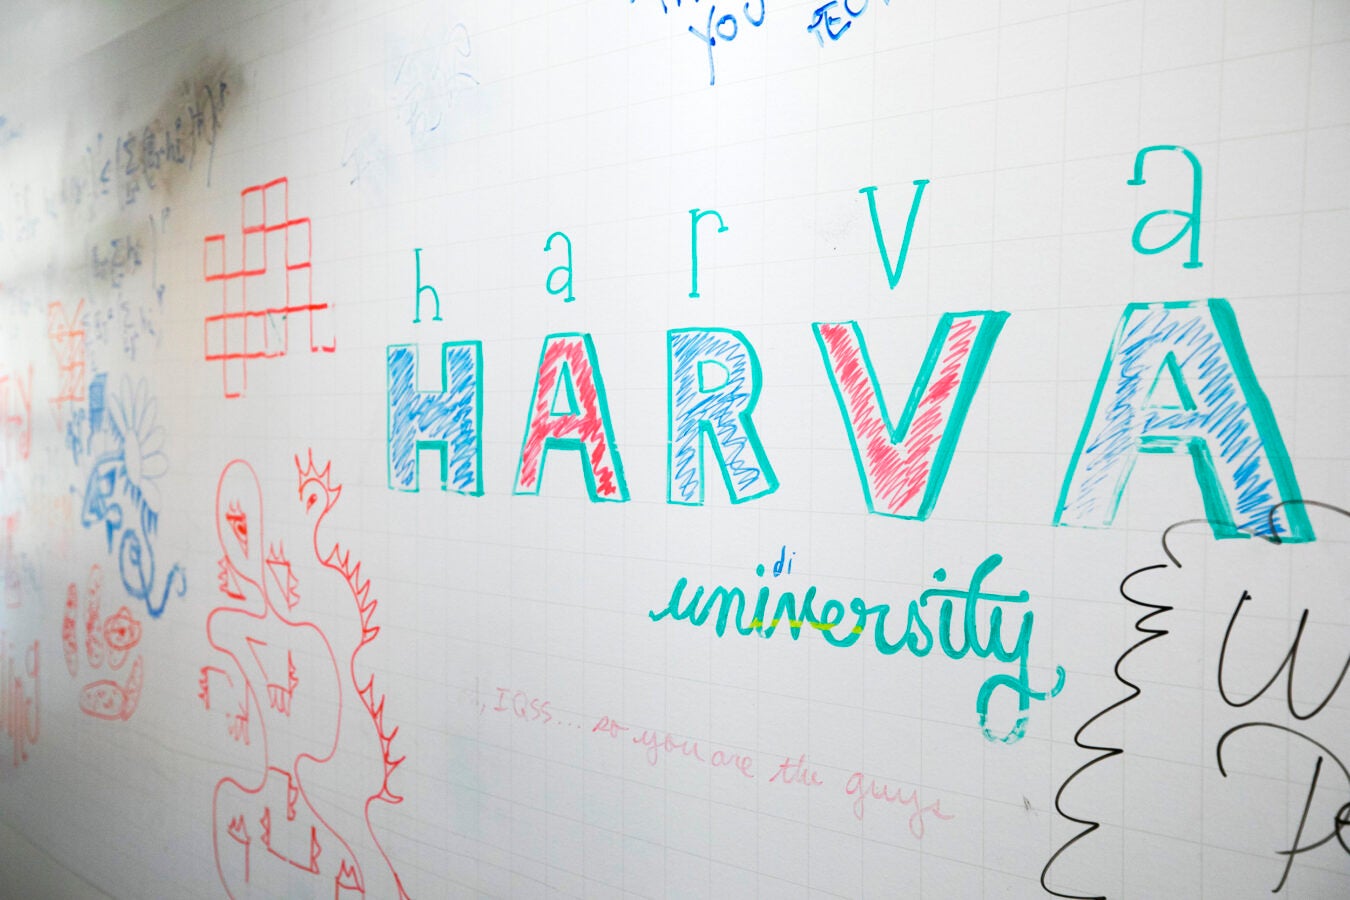 Doodles on whiteboard in hallway of Institute for Quantitative Social Science.